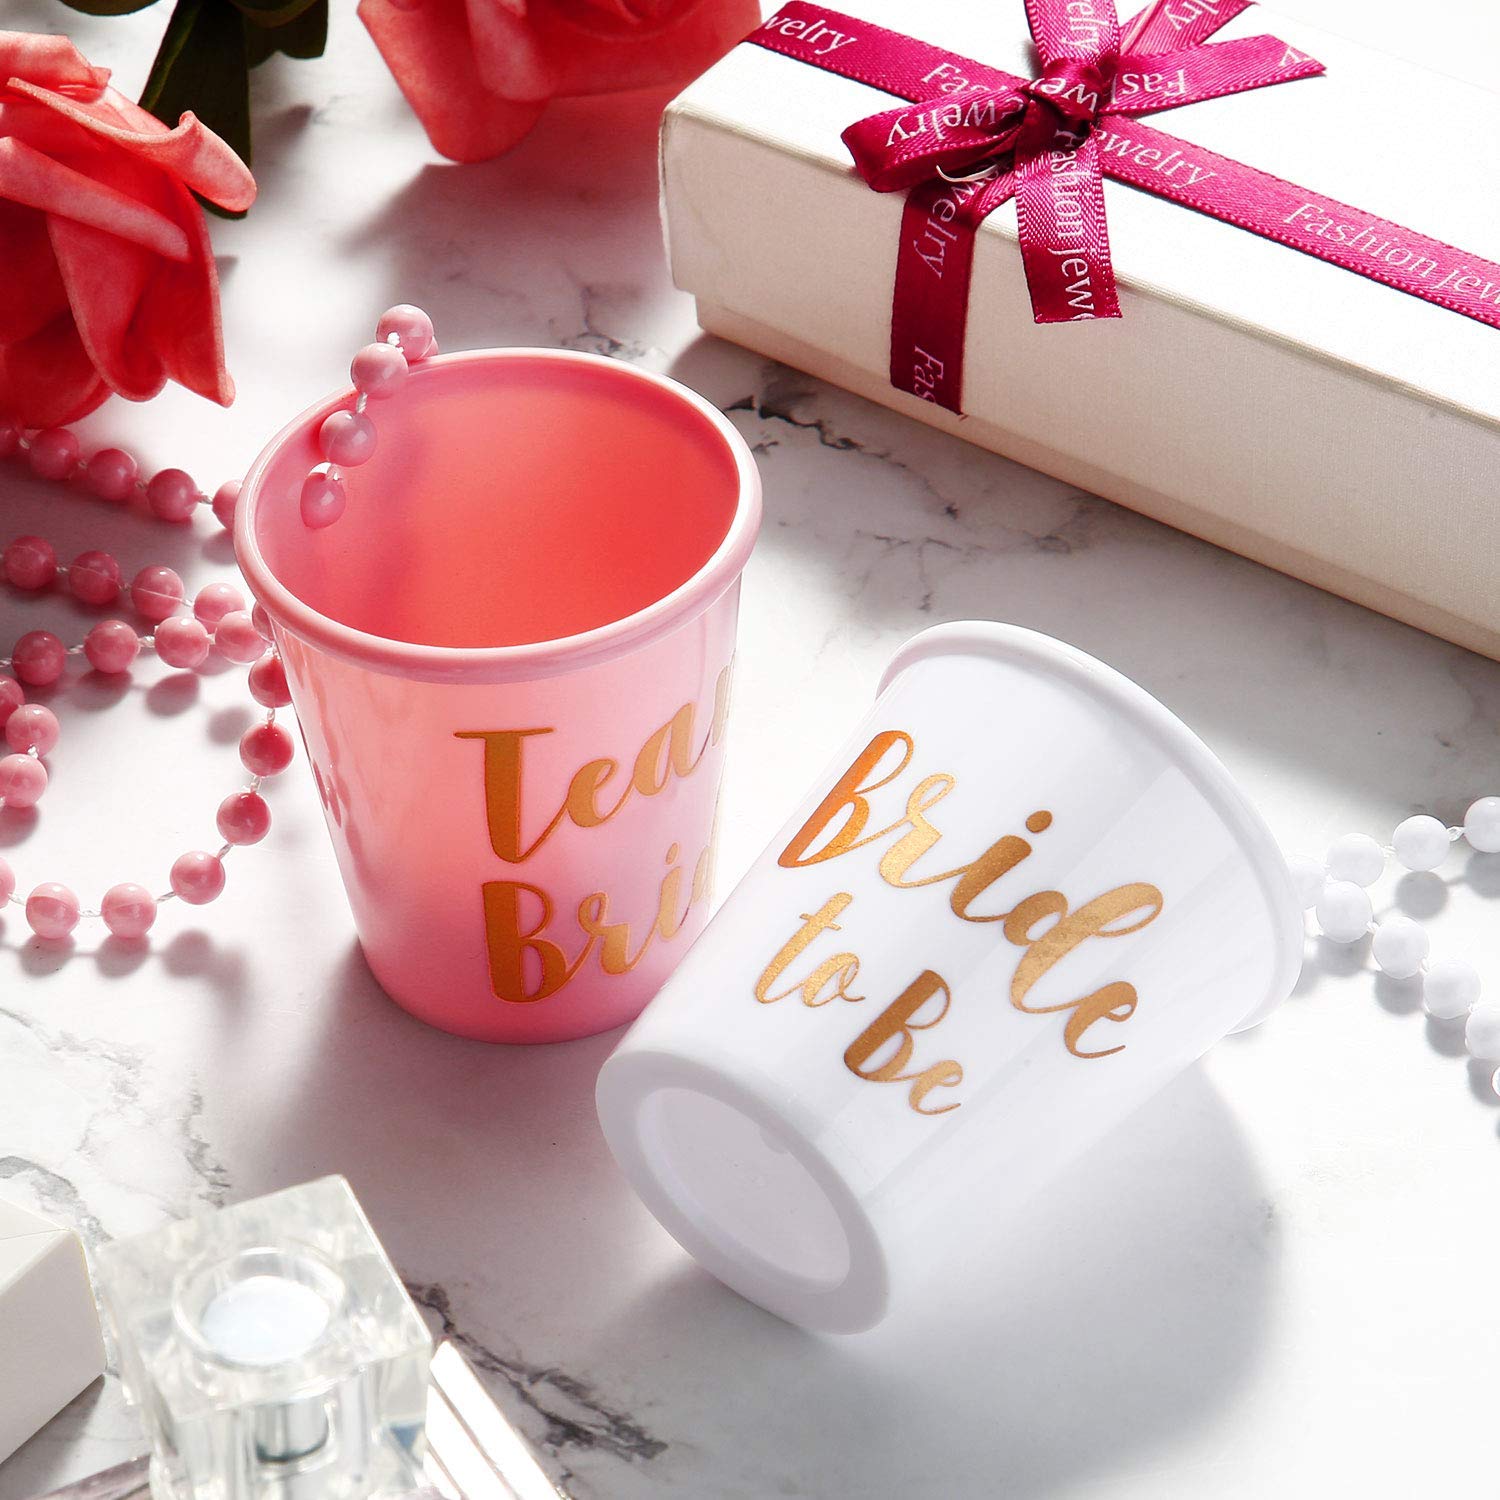 Boao 8 Pieces Bride Shot Necklace Glass, Bachelorette Shot Glass Necklace with Gold Foil for Wedding Bachelor Party and Bridal Shower Decorations(Pink)